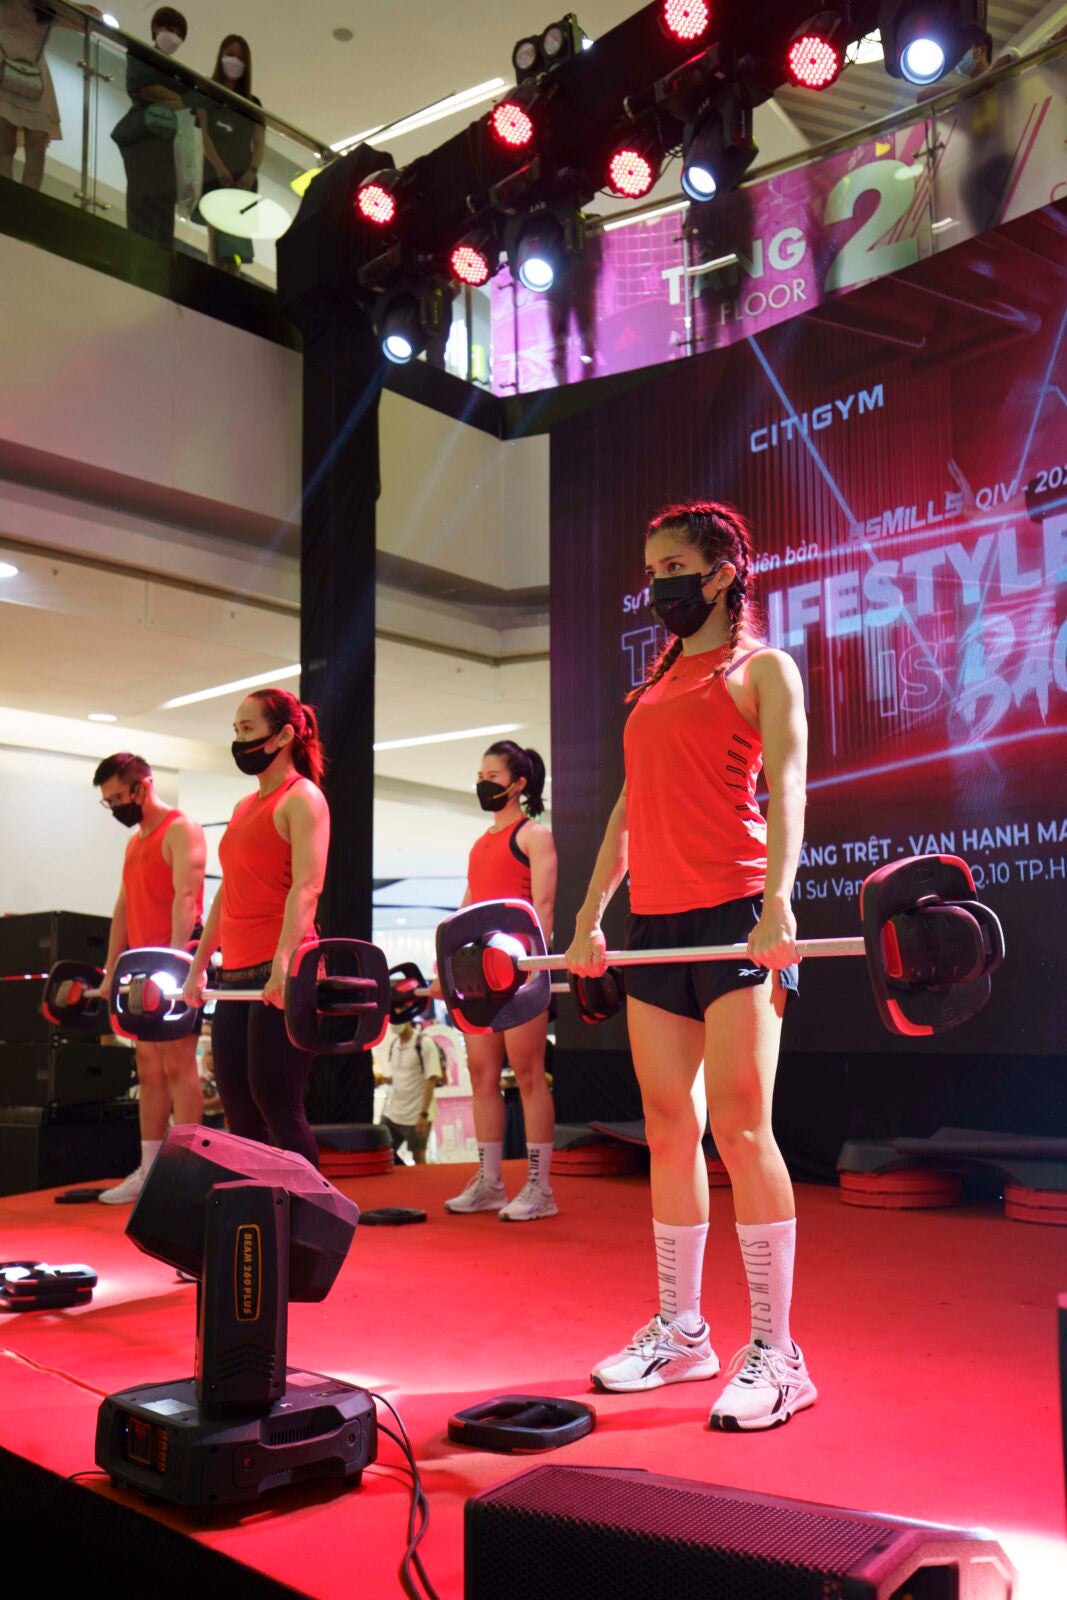 Four fitness instructors, three woman and one man who are holding onto weights and standing on a stage in a mall as people from the upper levels look on.